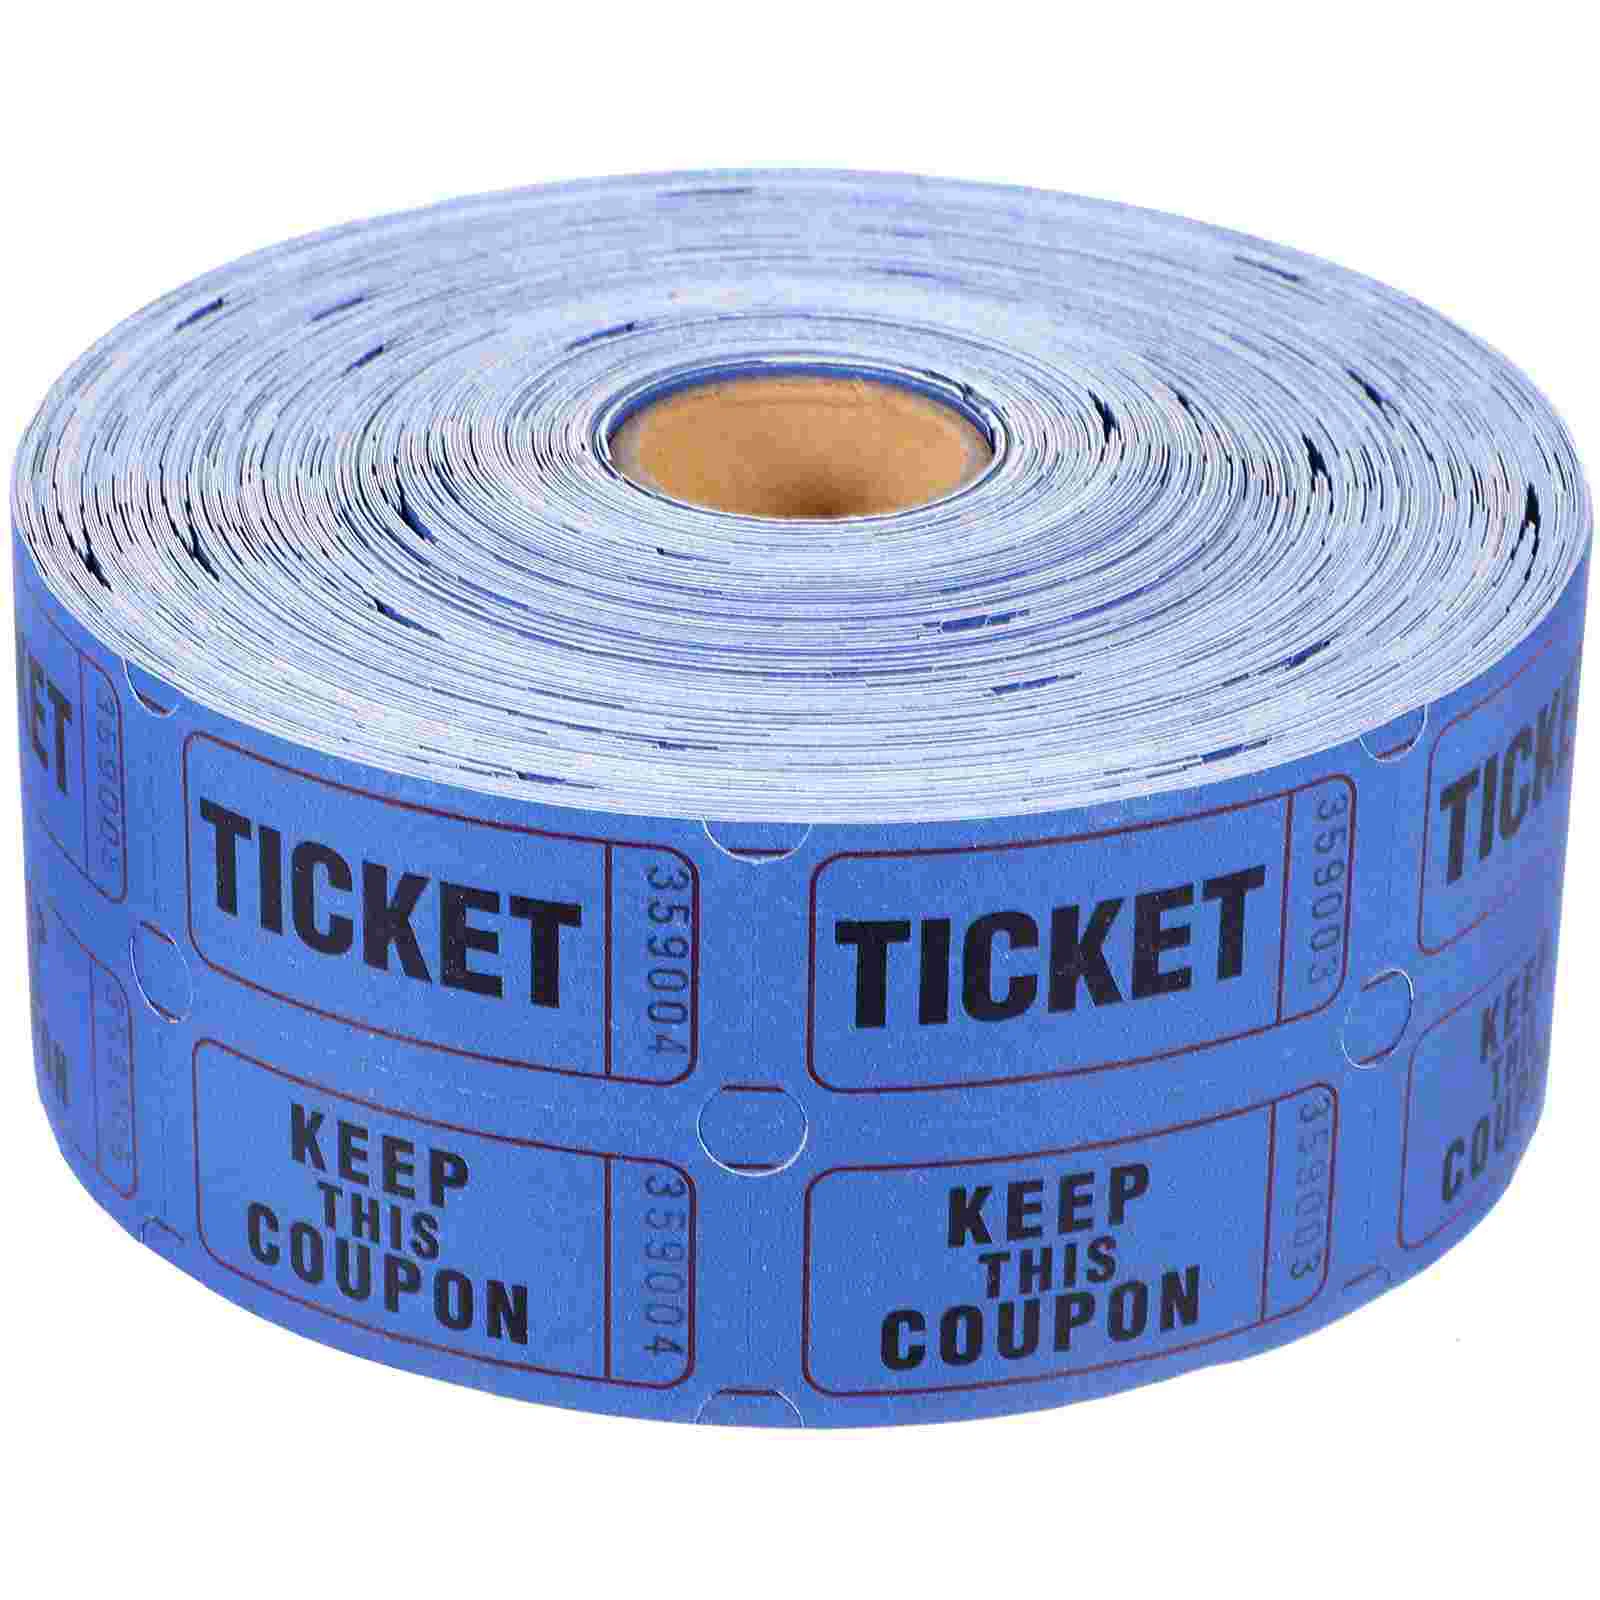 

1 roll of Raffle Tickets Universal Ticket Labels Universal Ticket Roll Events Tickets Universal Tickets